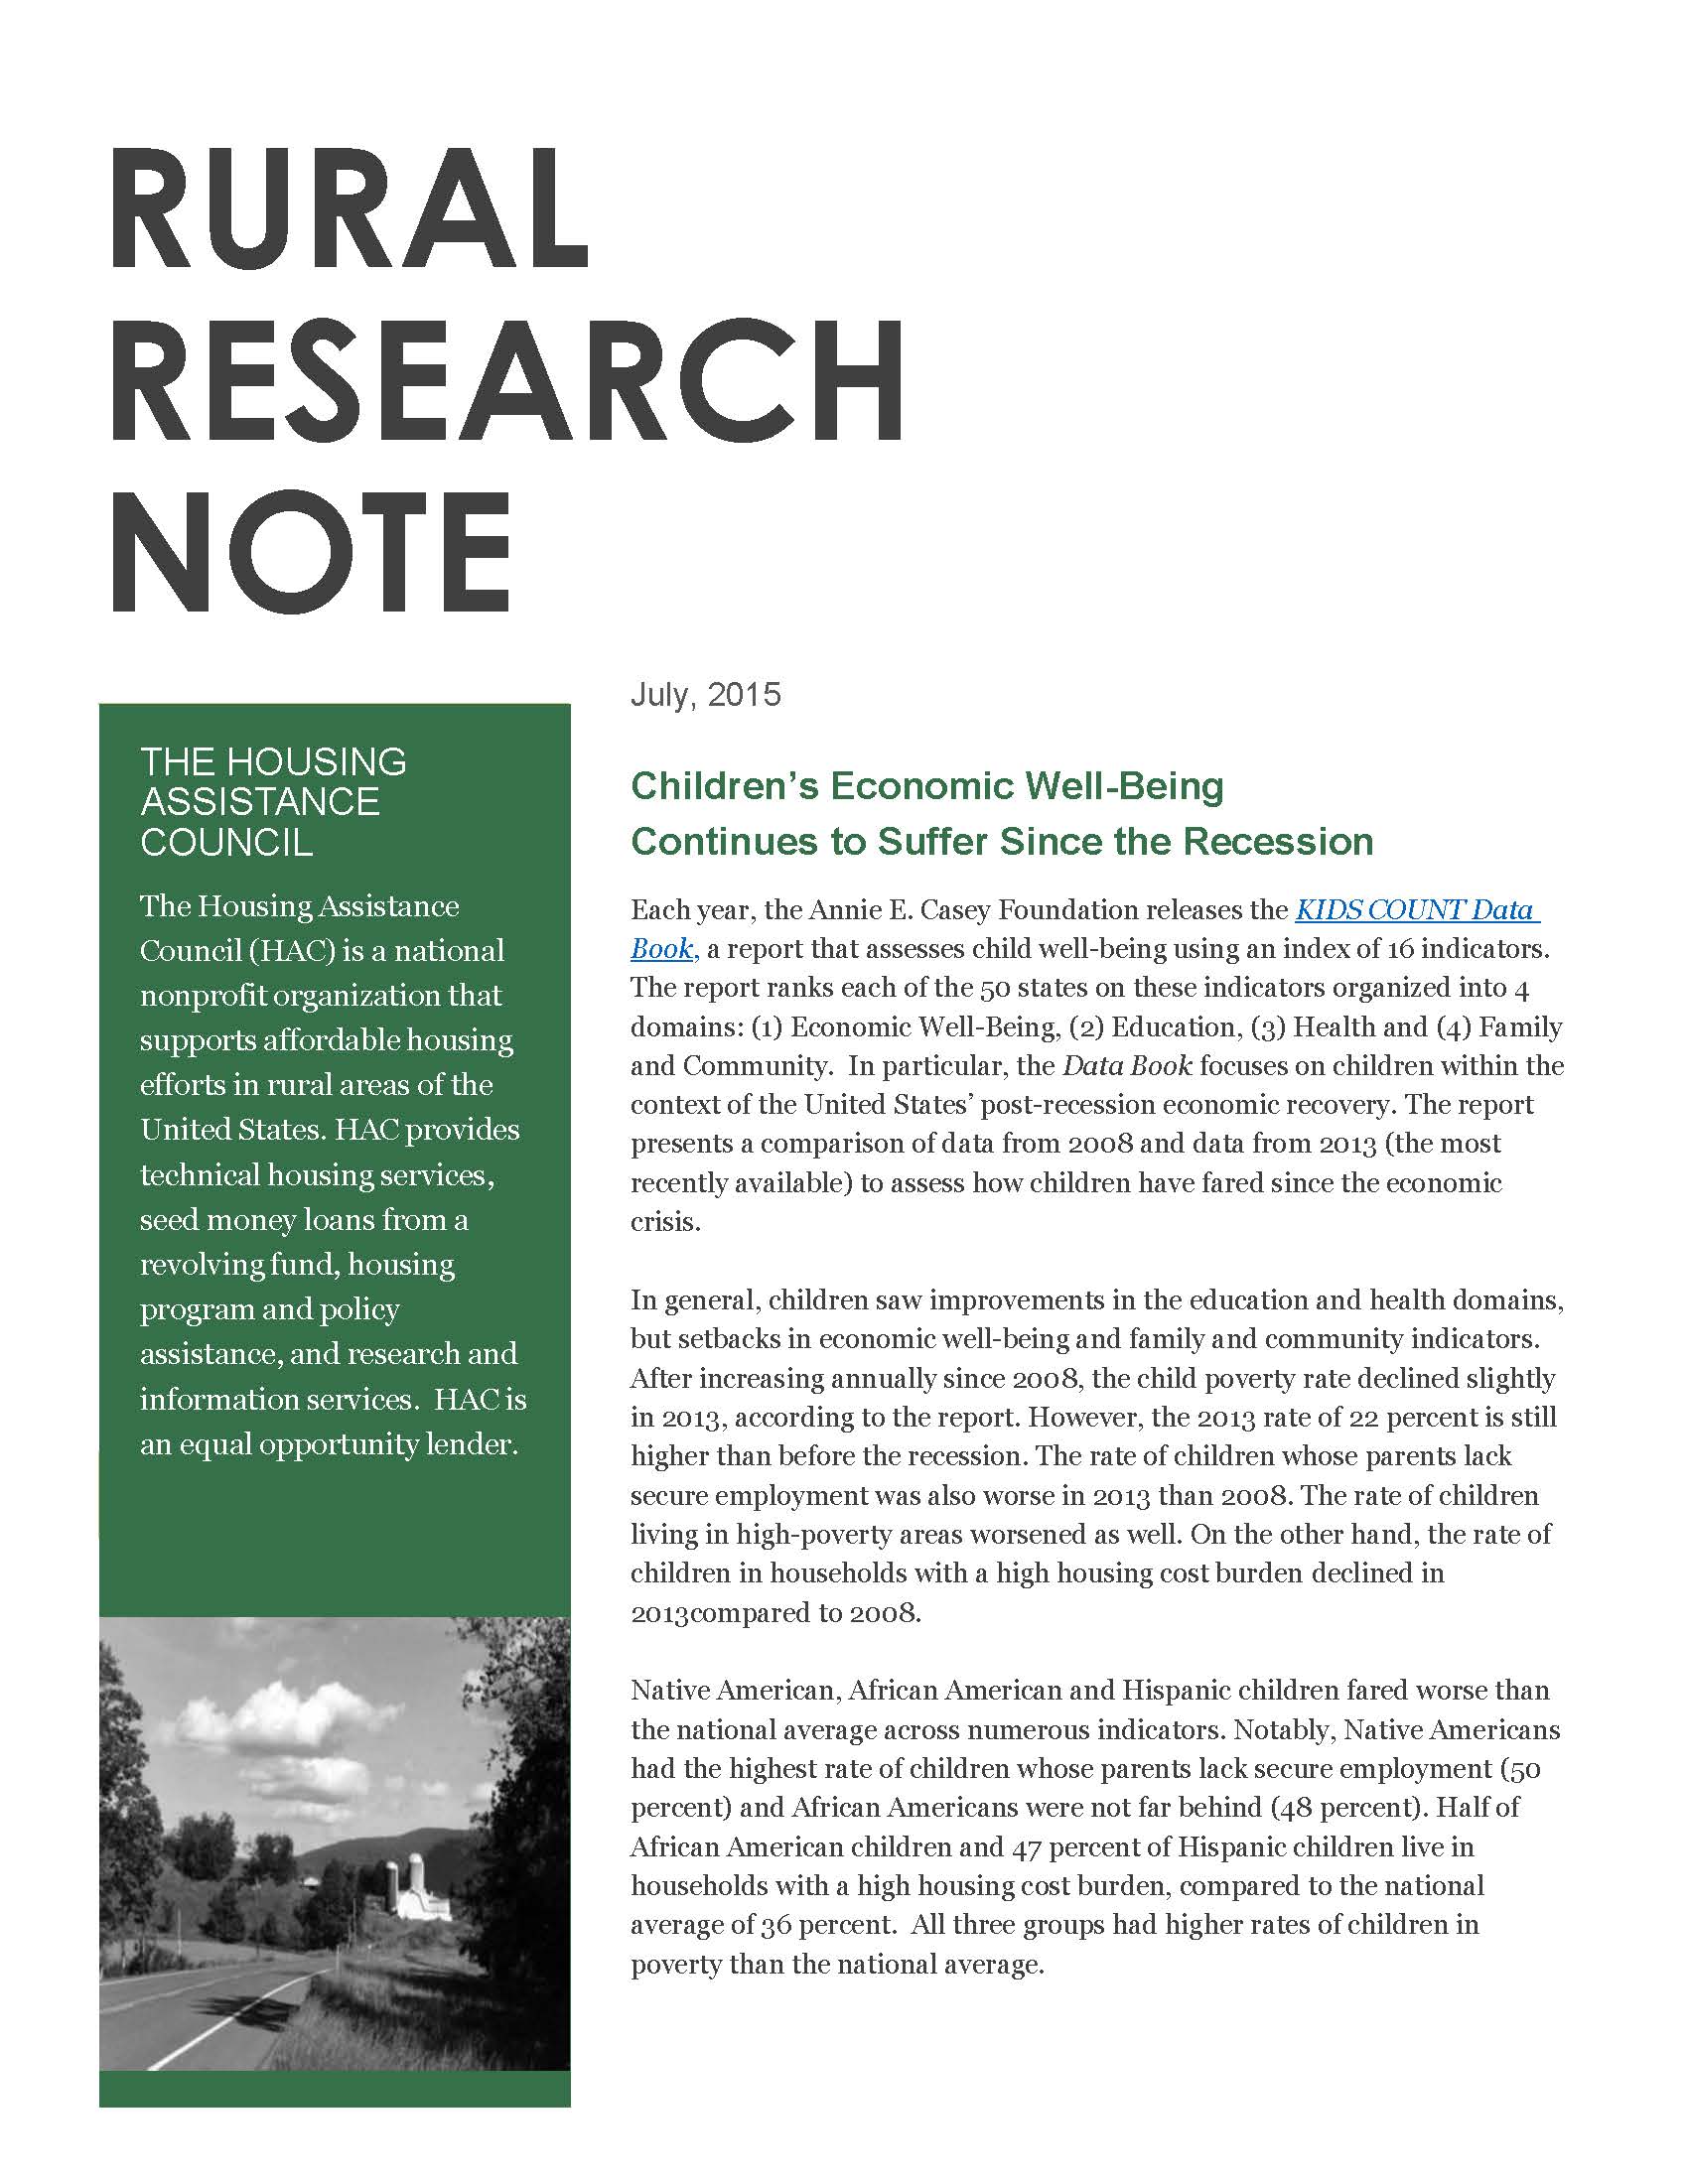 Kids Count Research Note